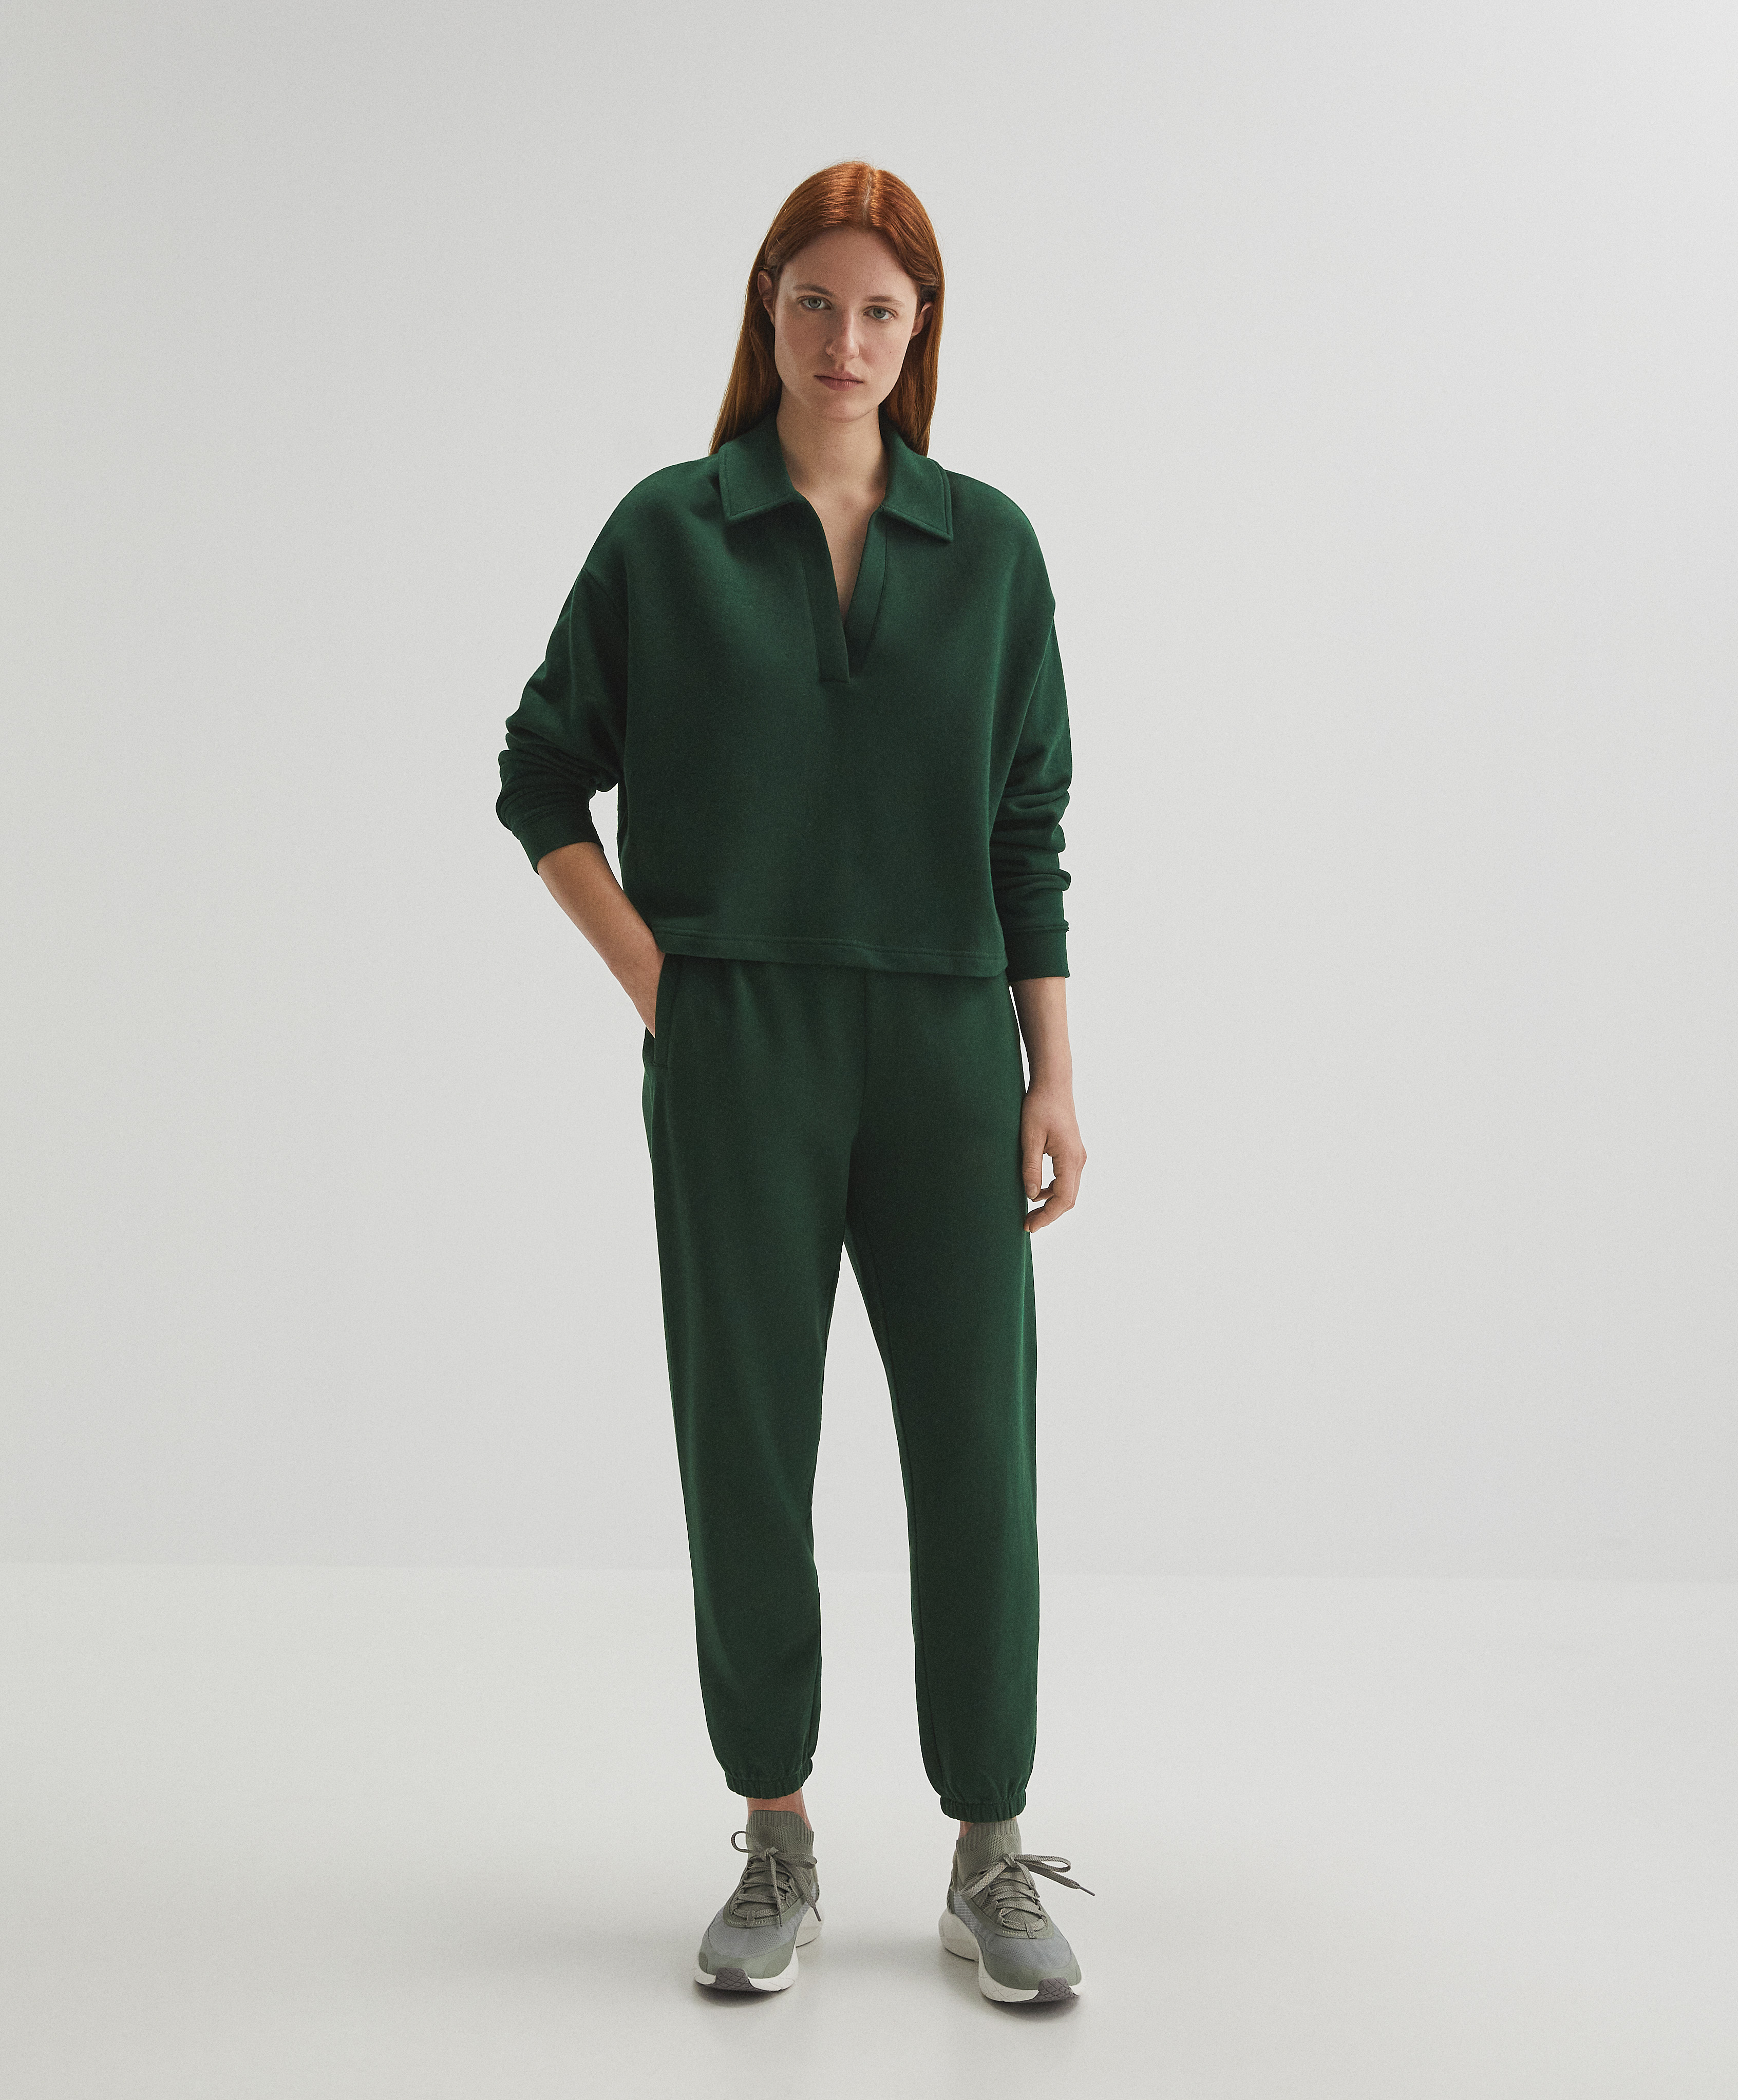 Green 100% cotton tracksuit